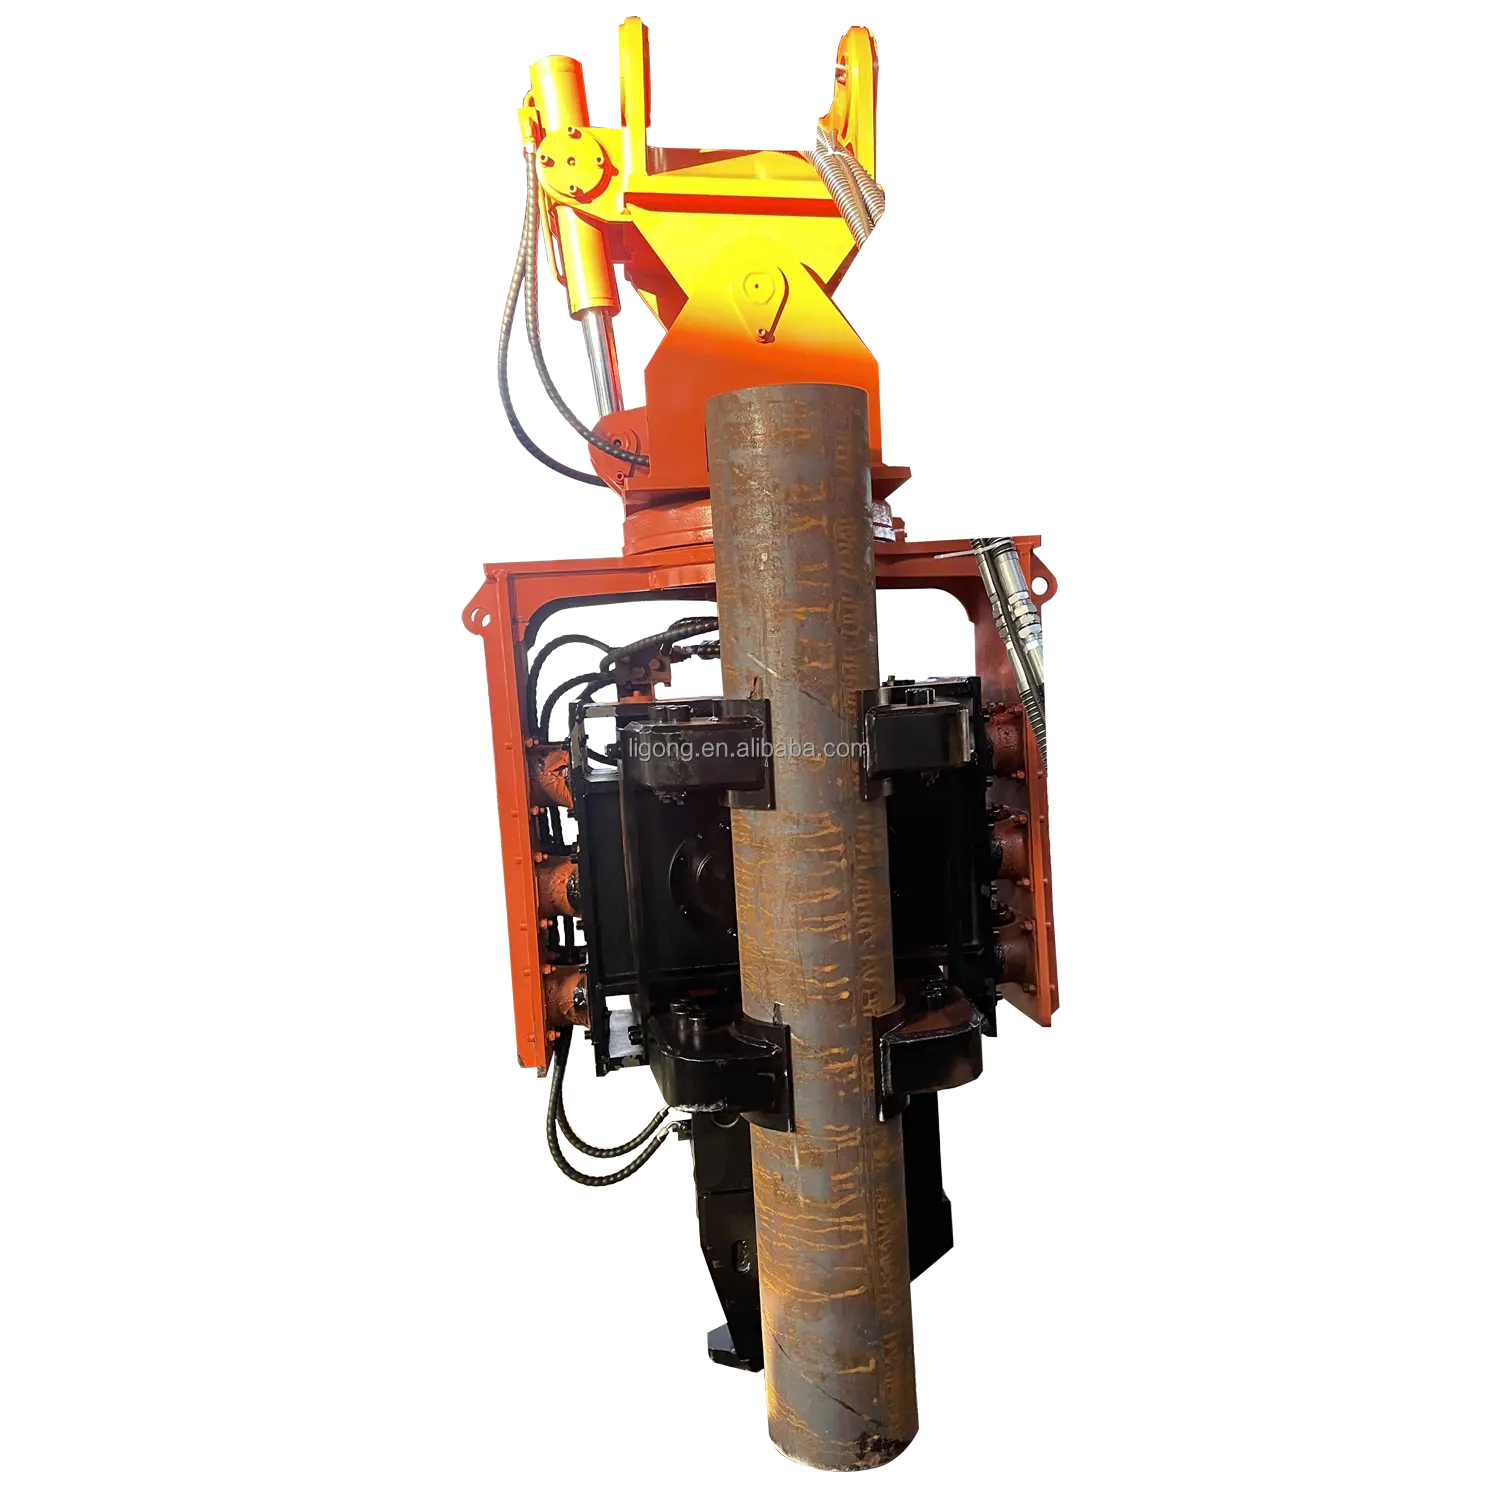 18 months warranty side clip vibro hammer for PC200 include attachments for clamping pipes from 150mm to 600mm diameter